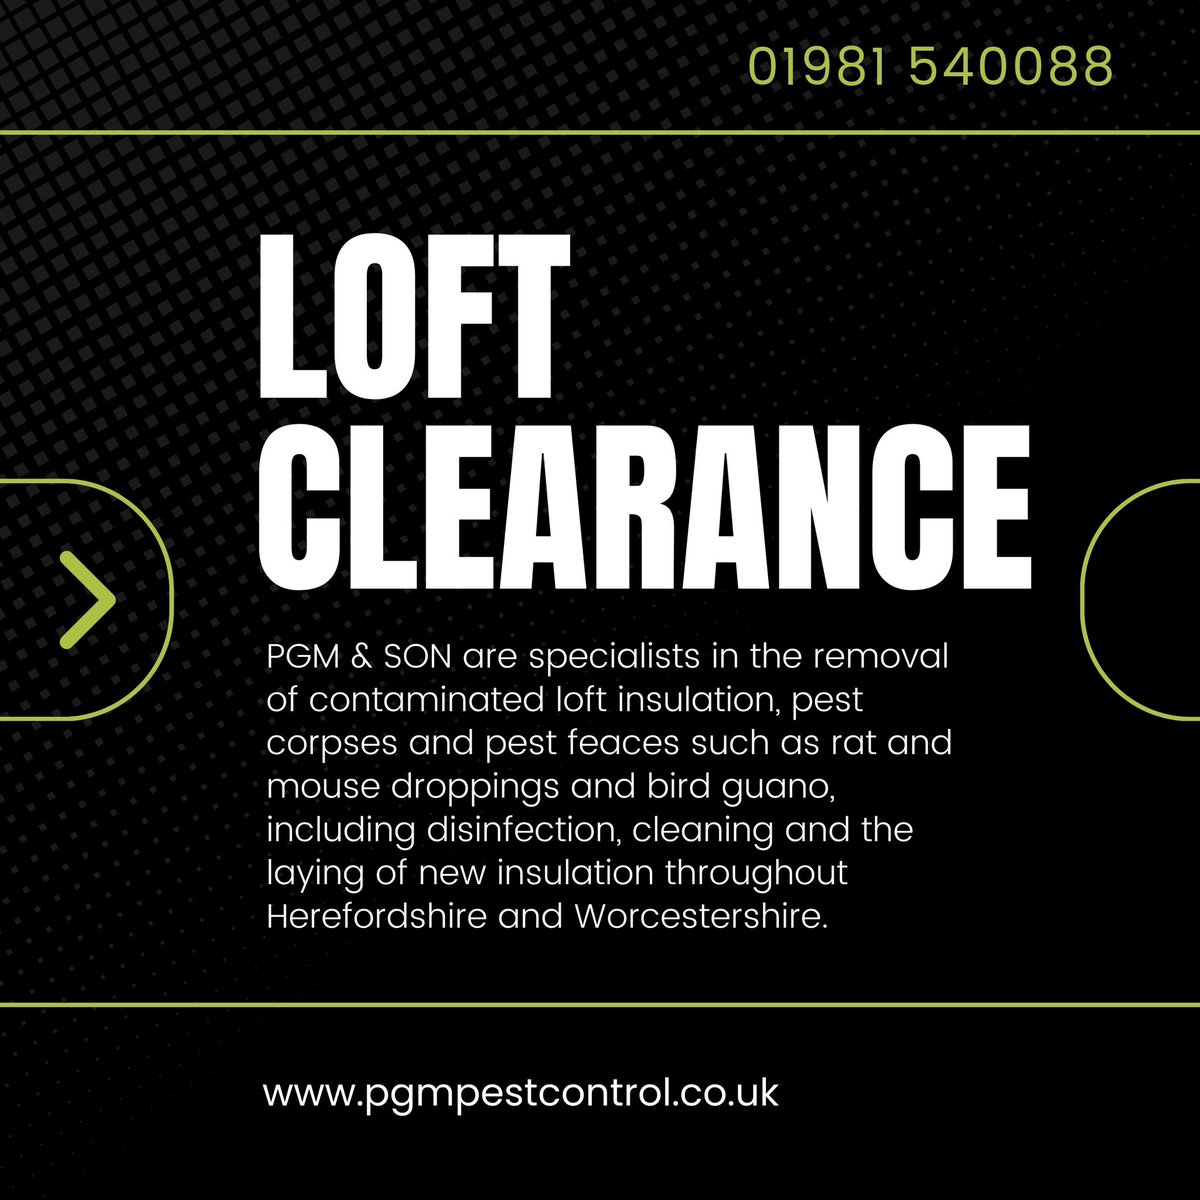 Need your loft cleared?💬 Visit our website now and chat with us! pgmpestcontrol.co.uk/loft-clearance…

#MakePestControlGreenAgain Get in touch today! 
☎️ 01981 540088  📧 contact@pgmpestcontrol.co.uk

#Hereford #Herefordshire #Worcester #Worcestershire #leominster #supportsmallbusiness